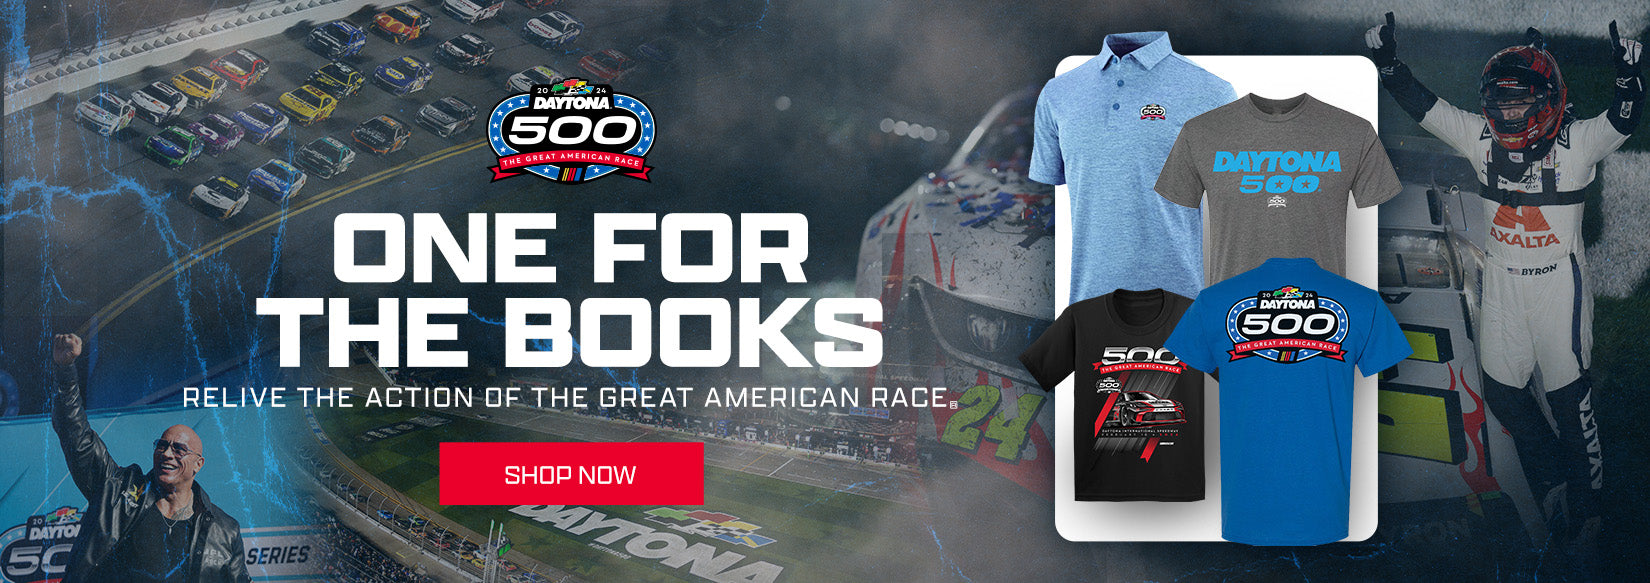 One for the Books - Relive the Action of the Great American Race - SHOP NOW